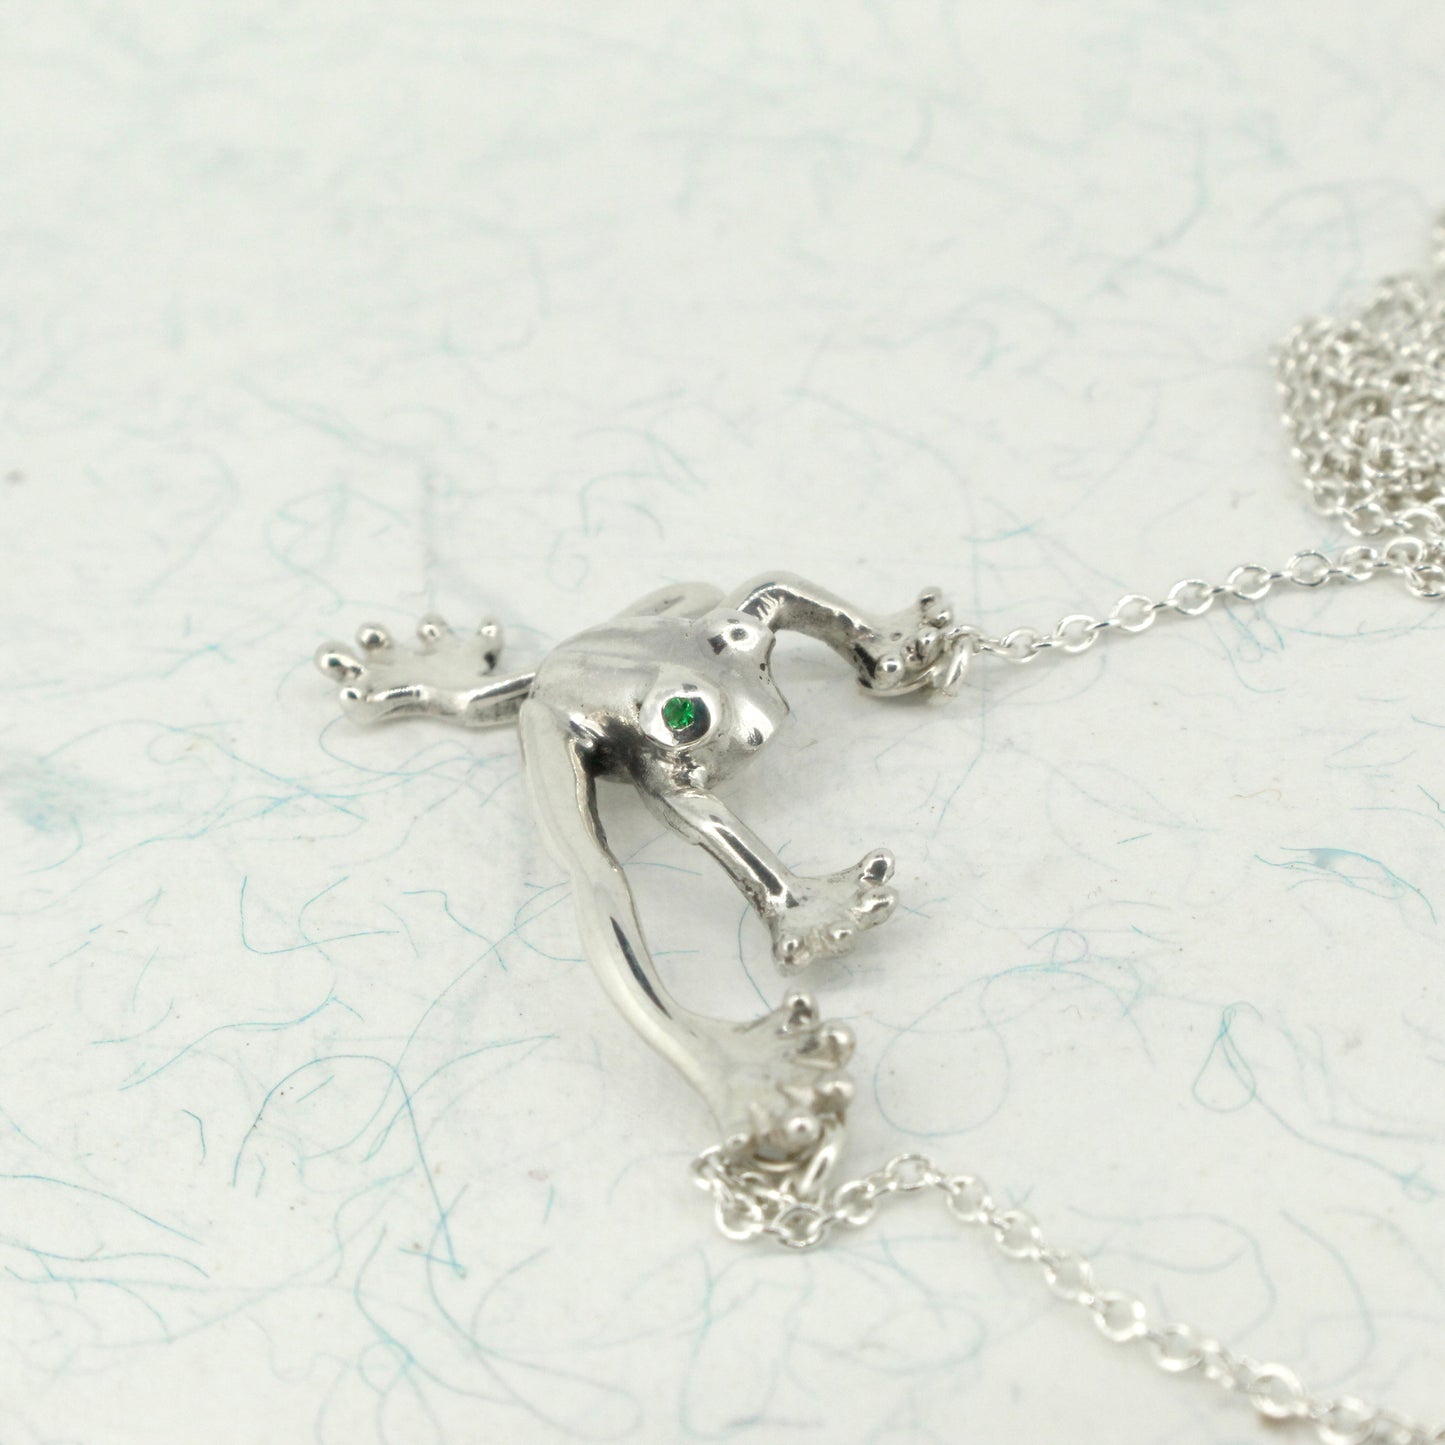 Froggy Necklace